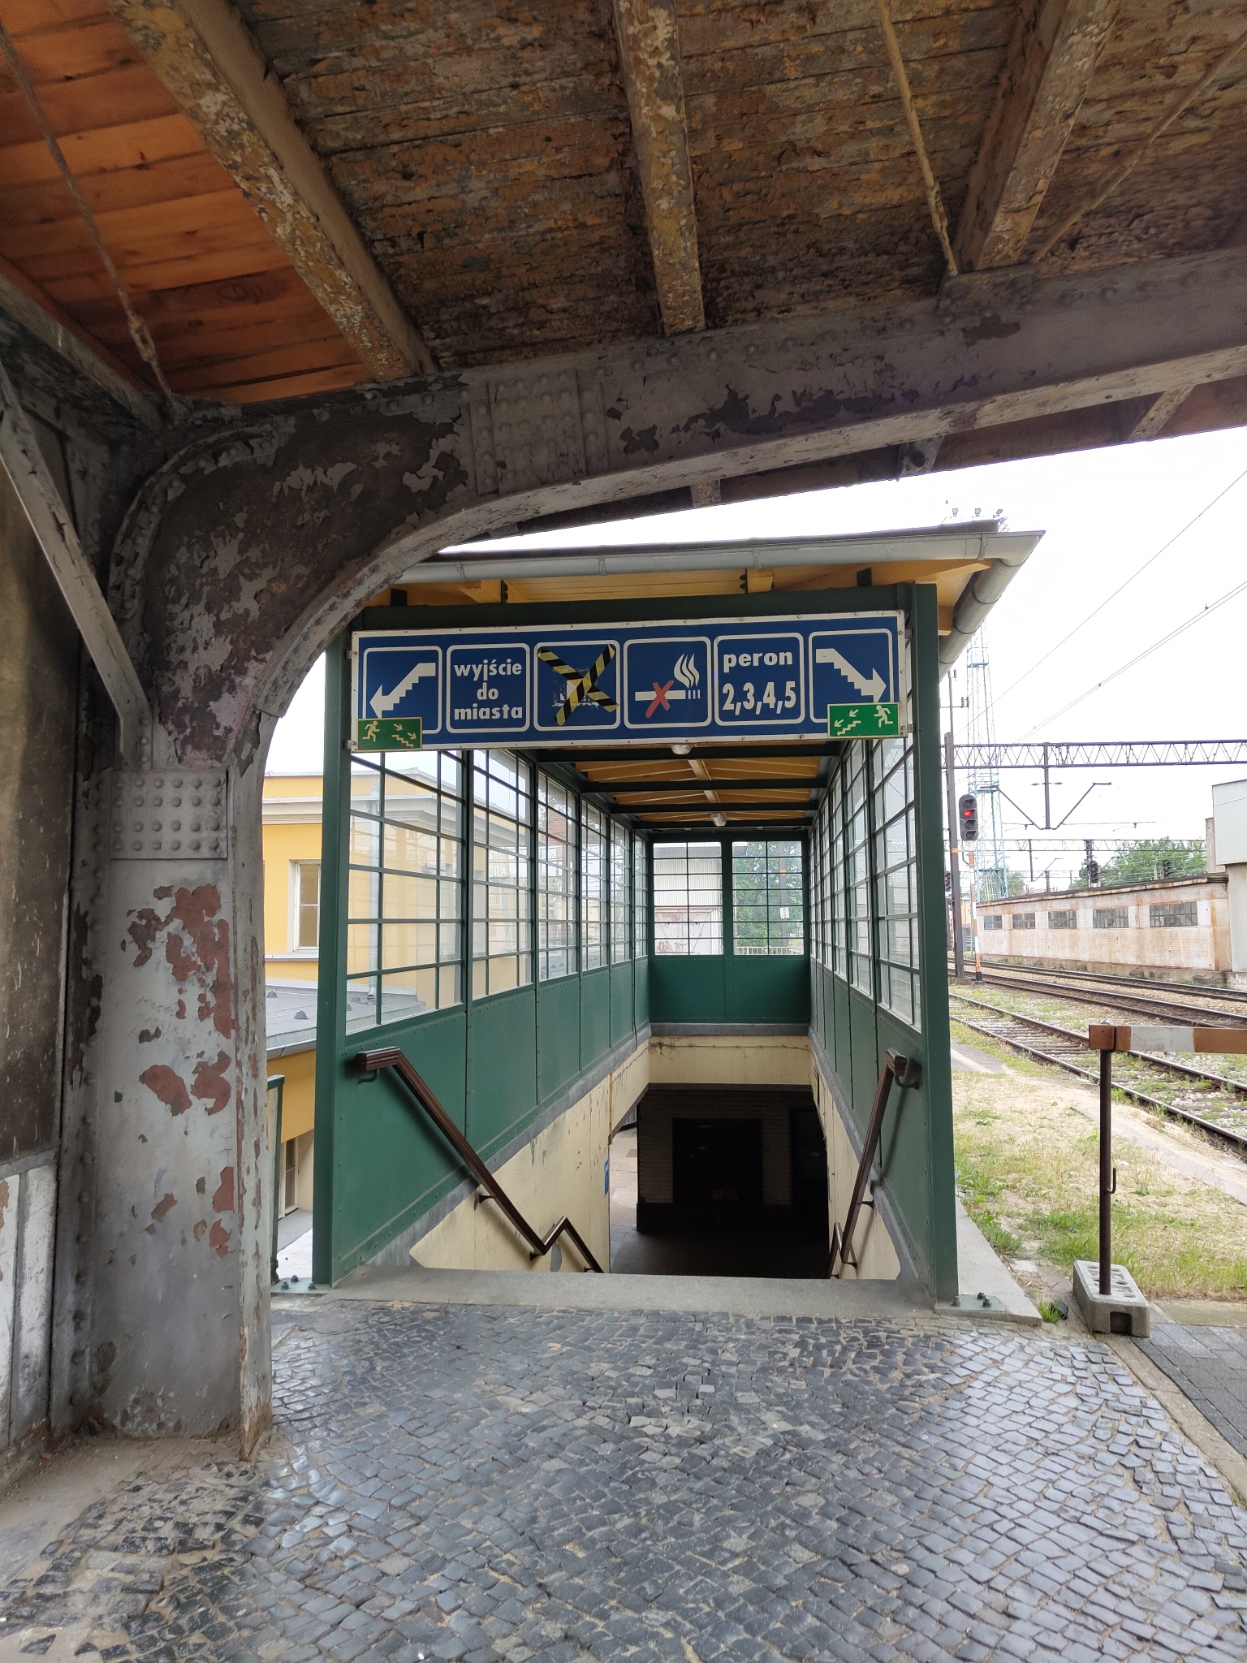 Photo of platform signage showing an arrow with stairs to the left, "exit to city", something crossed out by tape, a cigarette crossed out by a red cross, "platform 2,3,4,5" and another arrow with stairs, but to the right